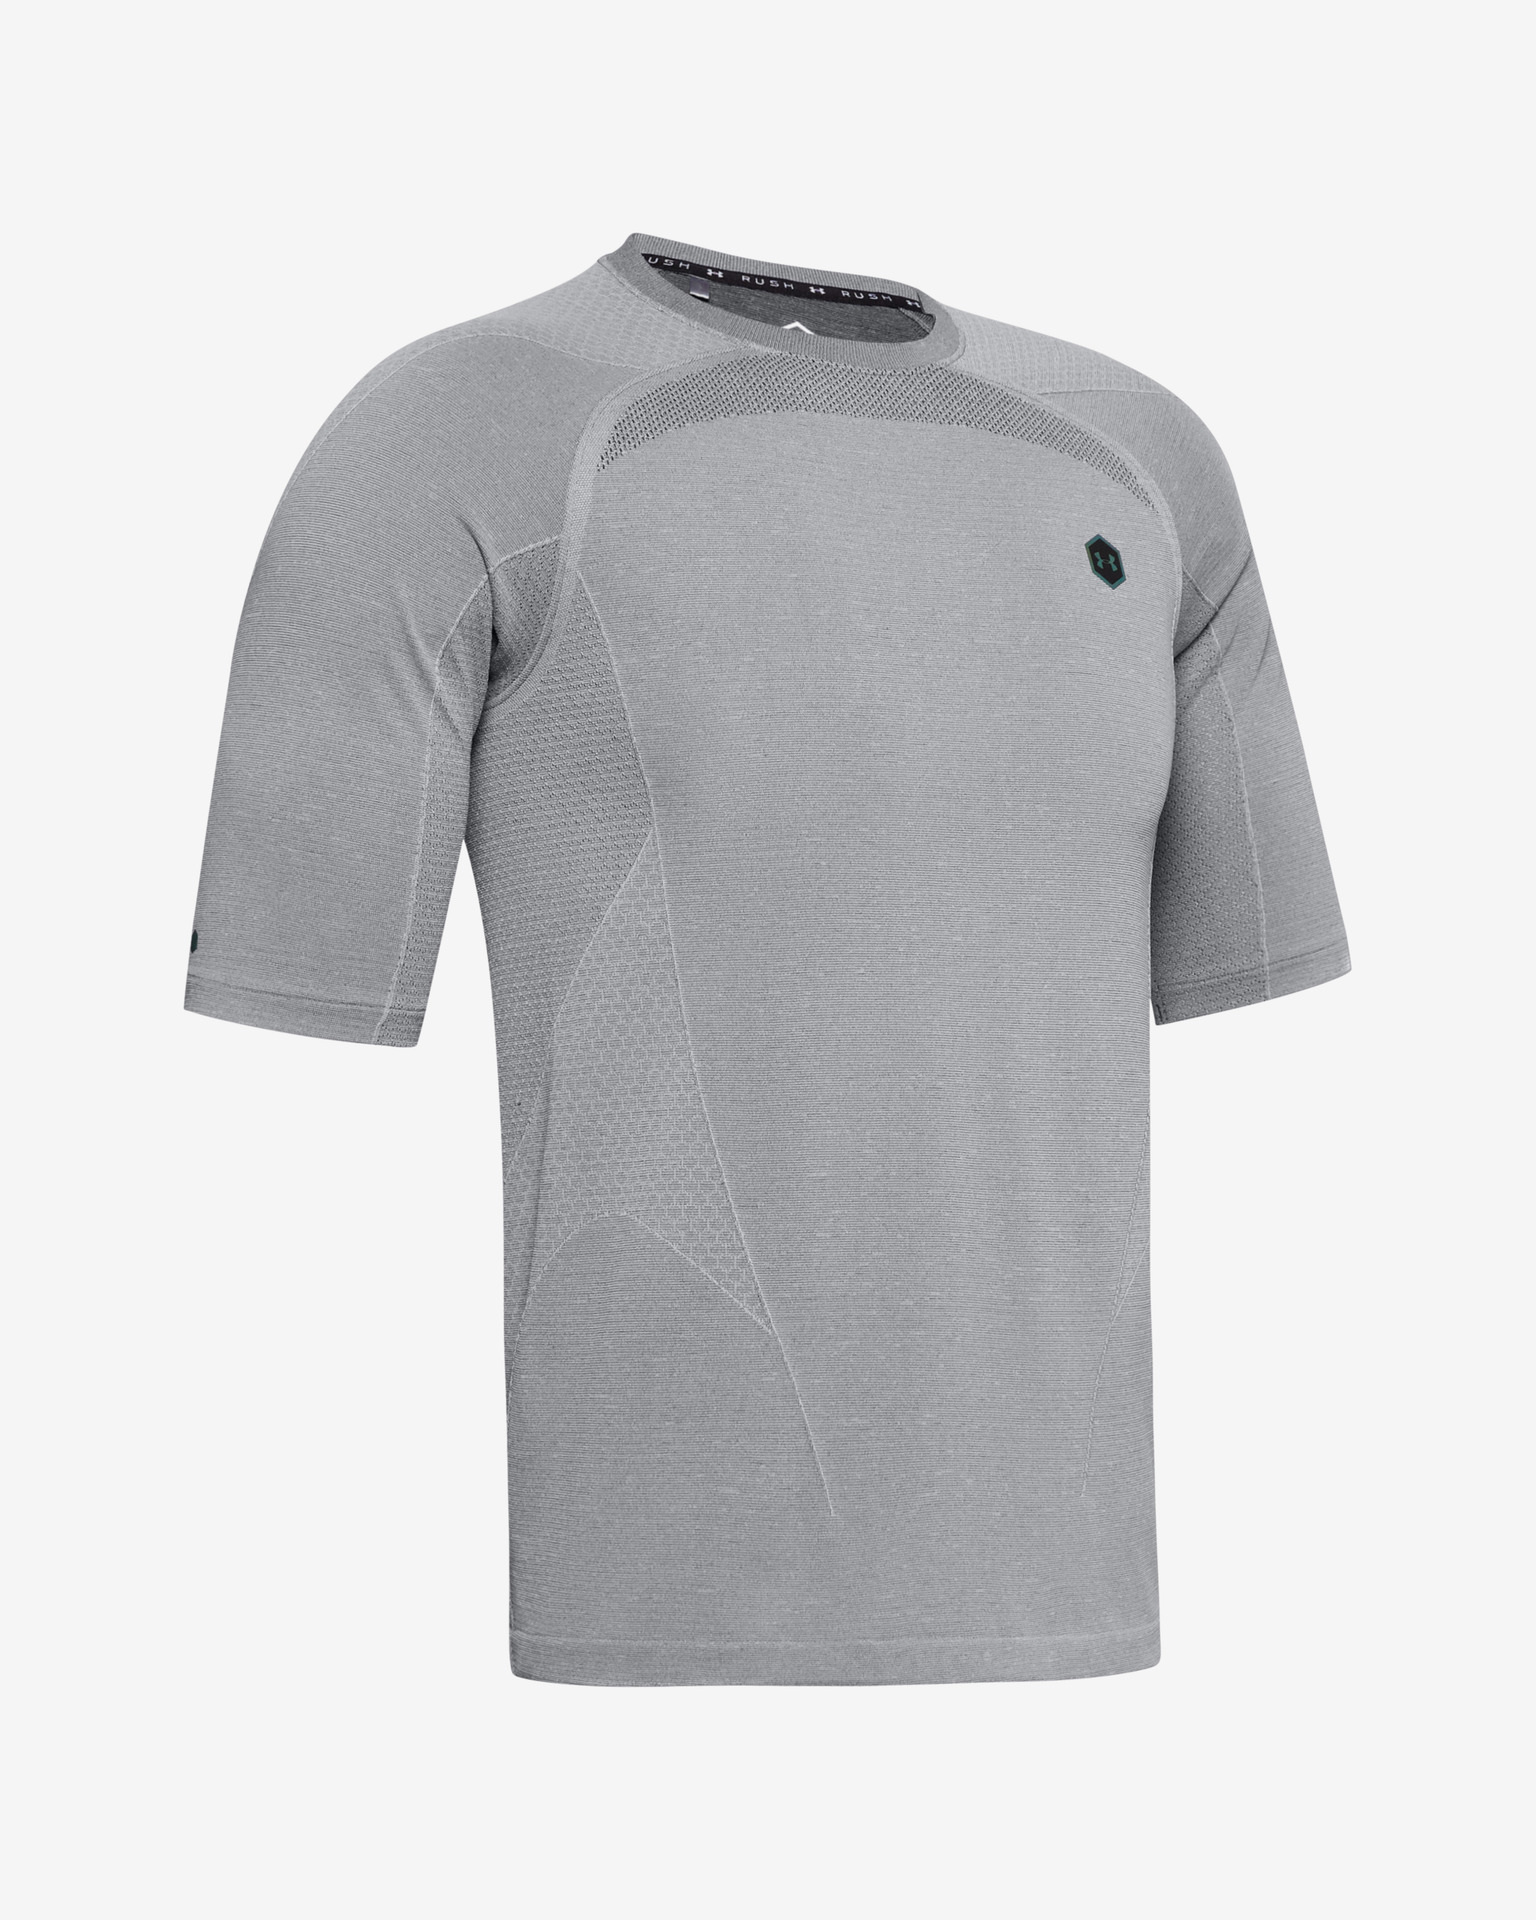 Under Armour Rush Compression Tank Top Mod Gray